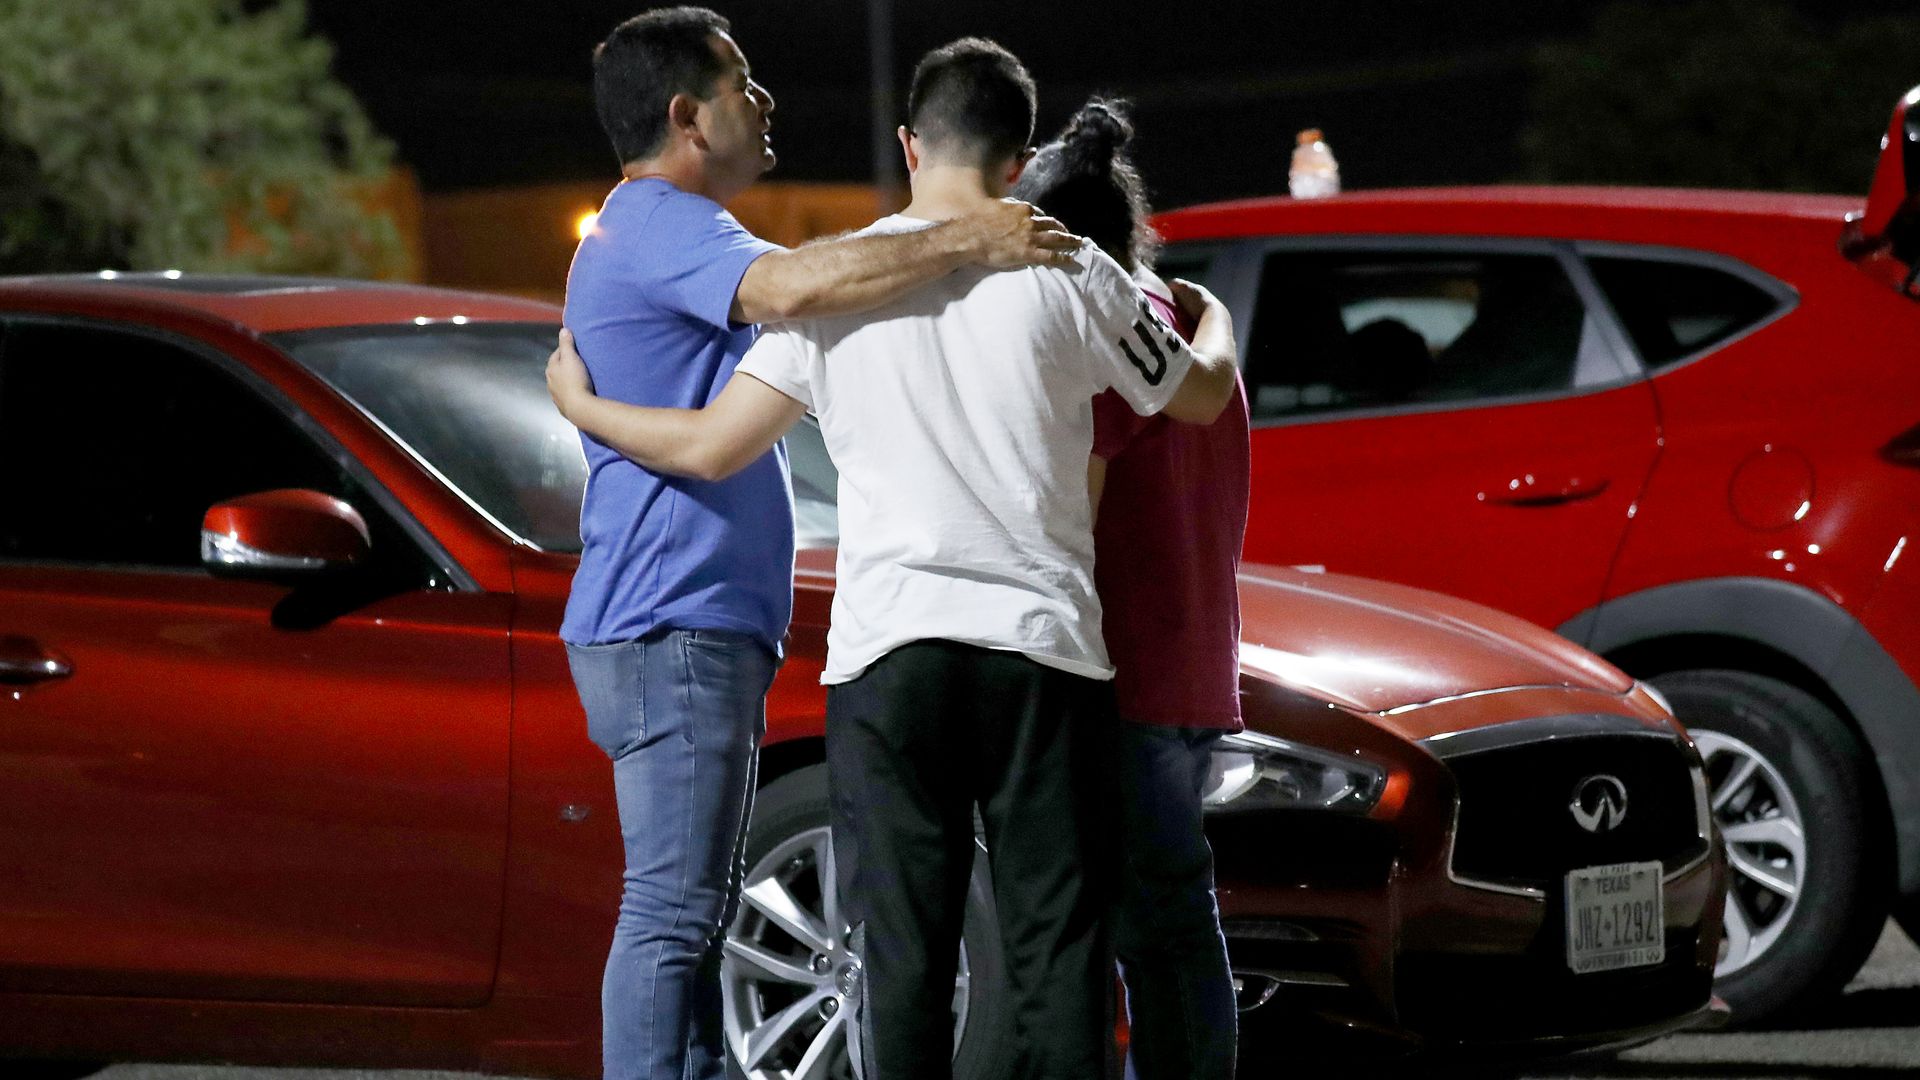 Members of the Arenas family, who are from El Paso and came to pray for victims, embrace outside Walmart near the scene of a mass shooting which left at least 20 people dead